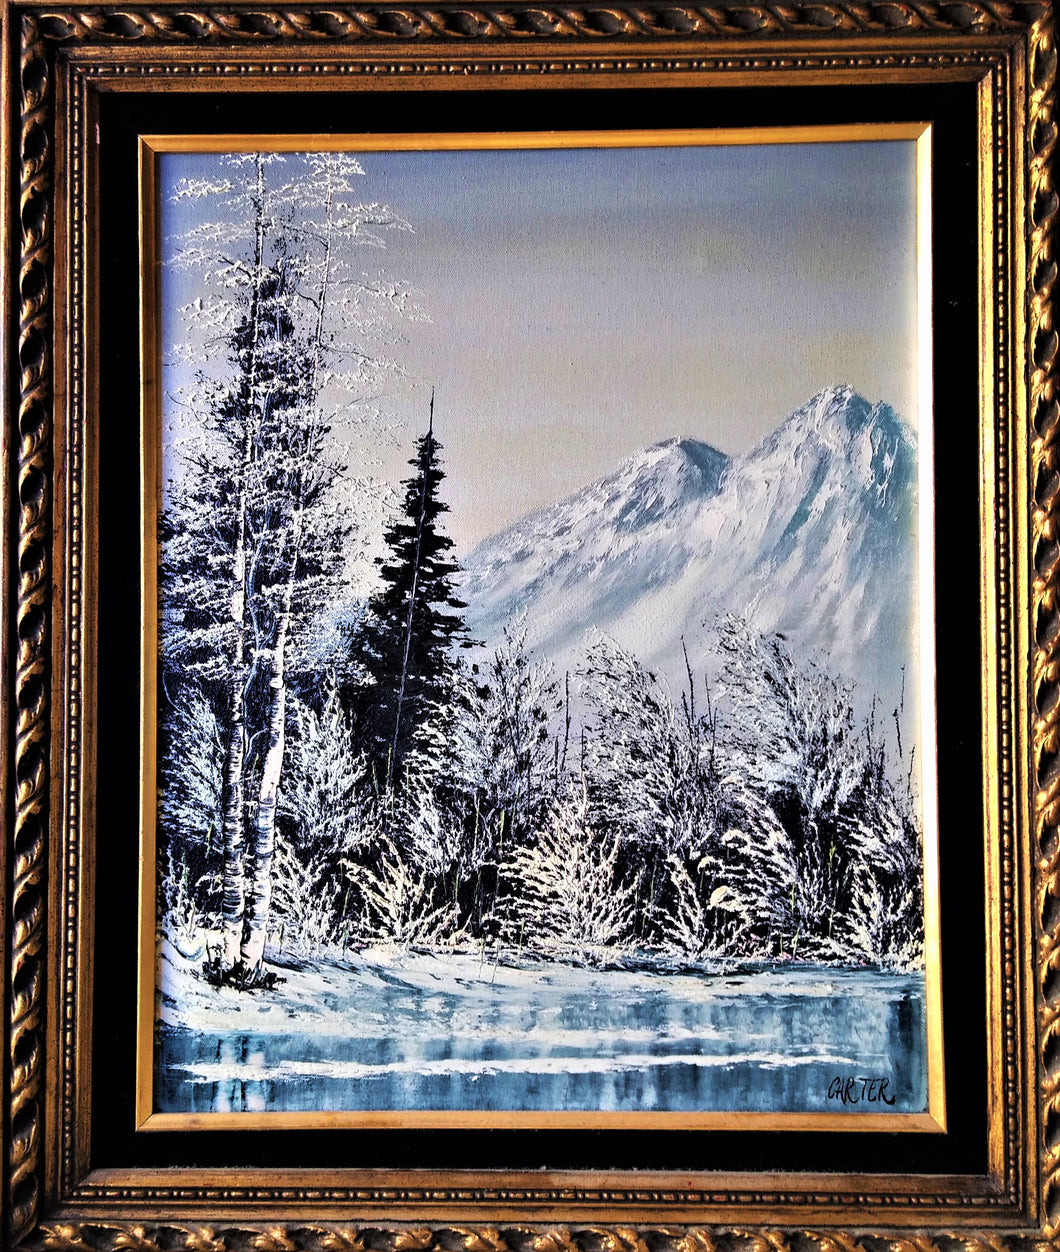 1960's Carter 24 x 20 Hand painted winterscape  Oil on canvas gold framed